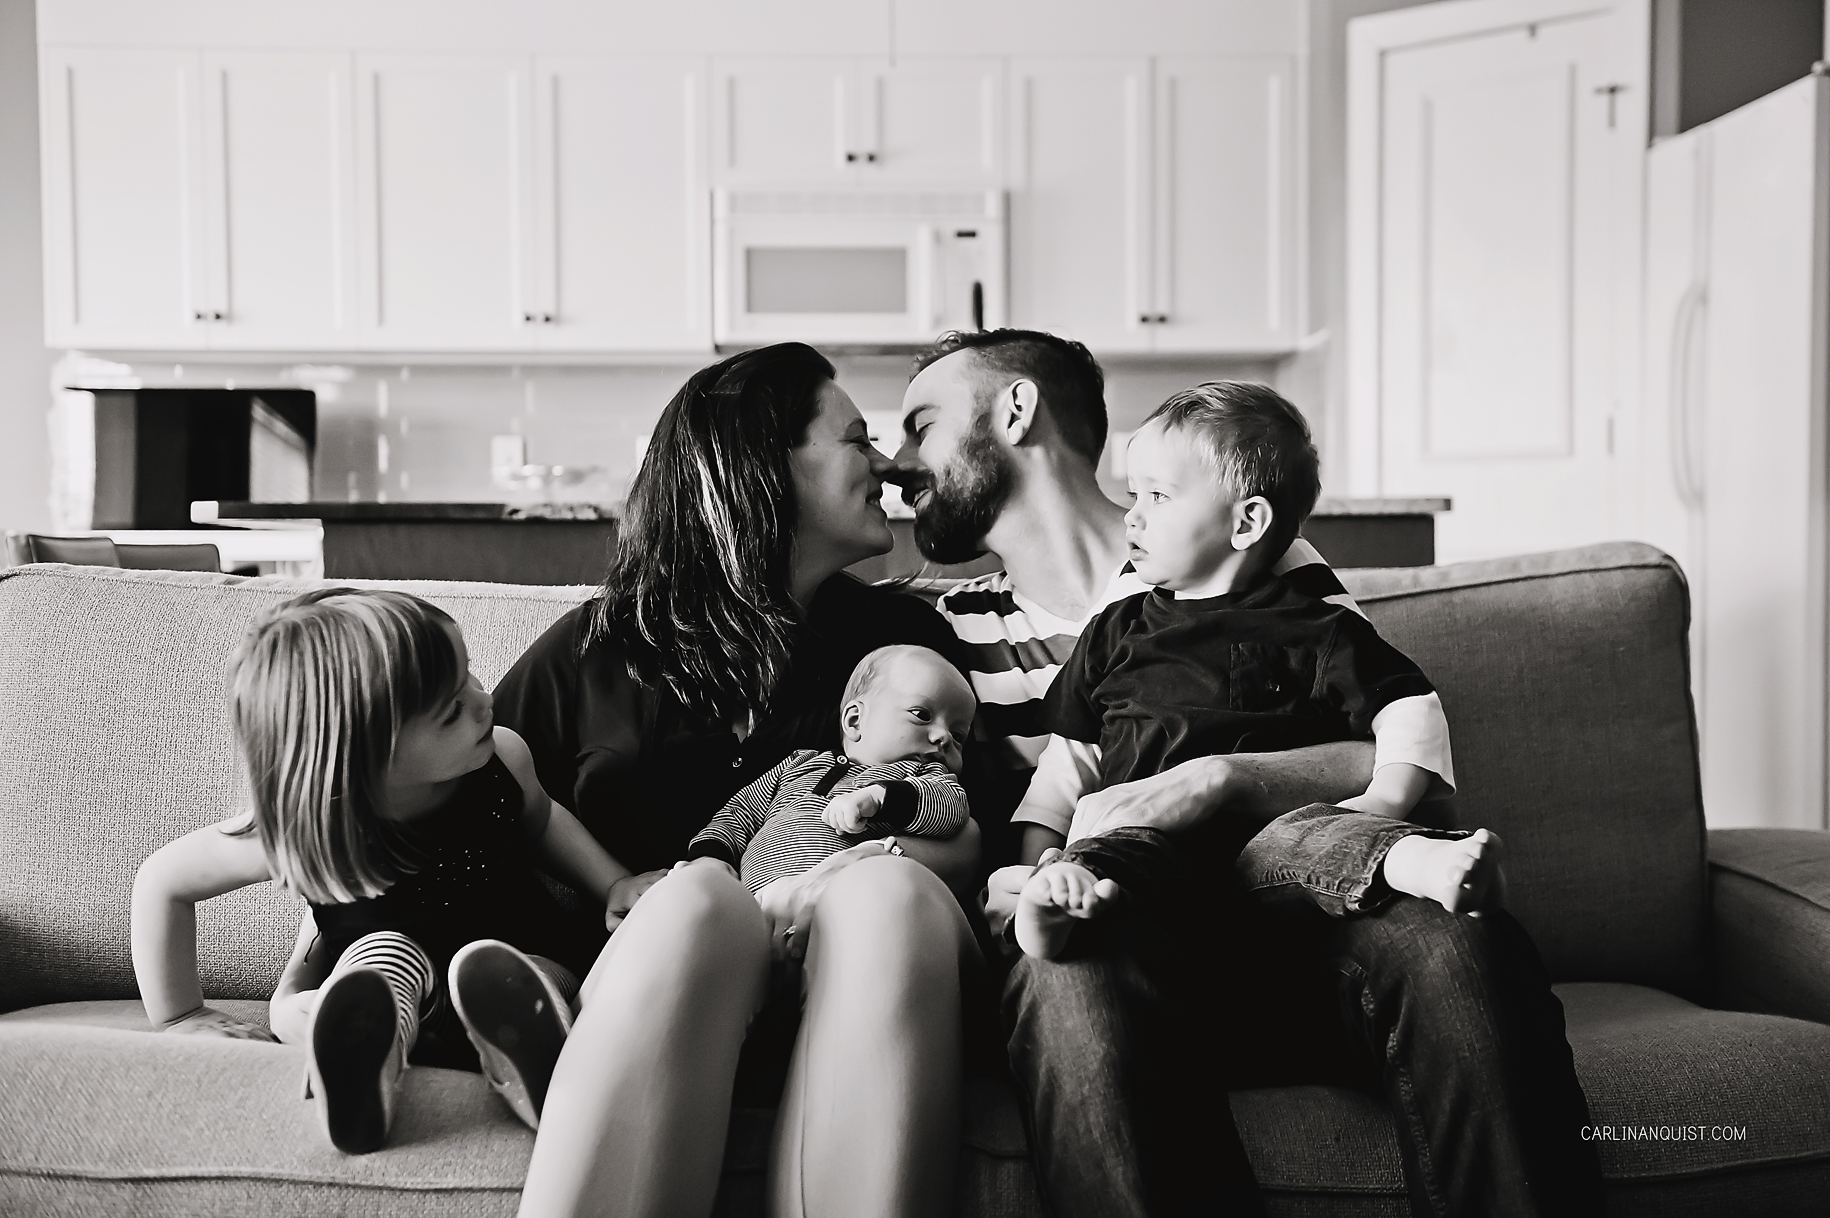 Calgary In-Home Lifestyle Newborn Photographers | Carlin Anquist Photography